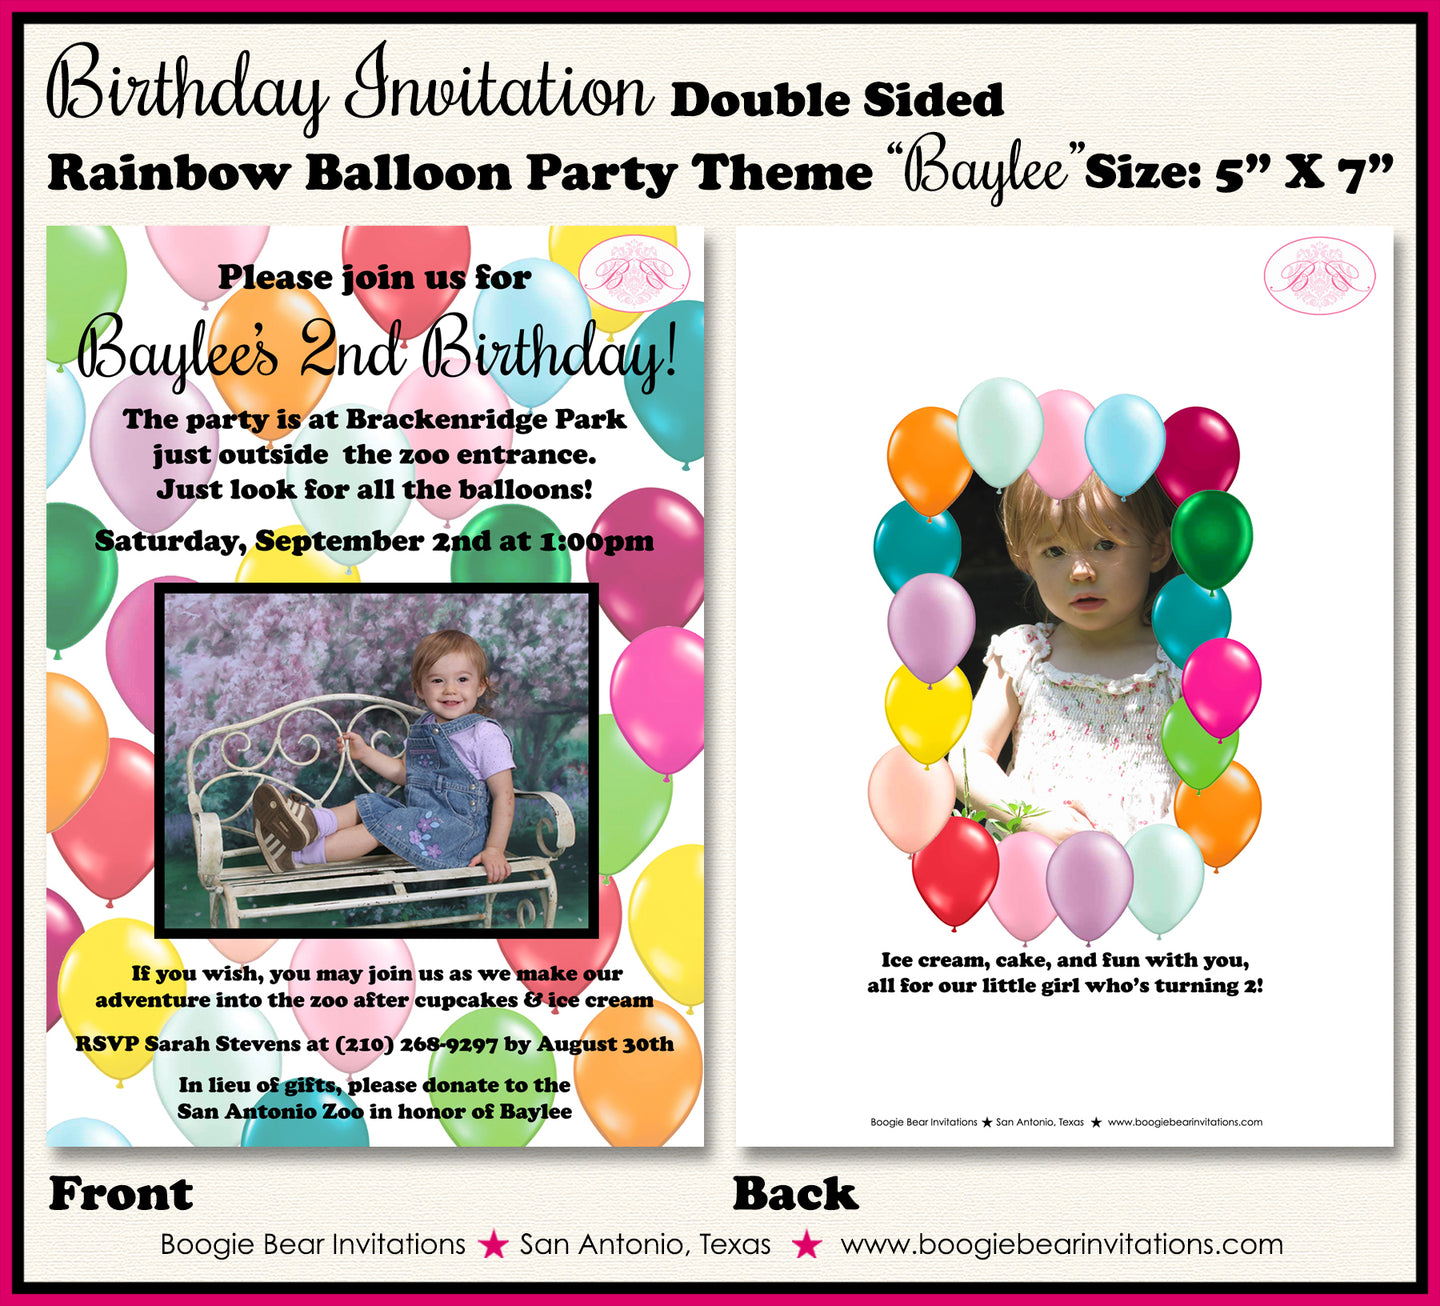 Balloons Photo Birthday Party Invitation Rainbow Colorful Painting Girl Boy Boogie Bear Invitations Baylee Theme Paperless Printable Printed